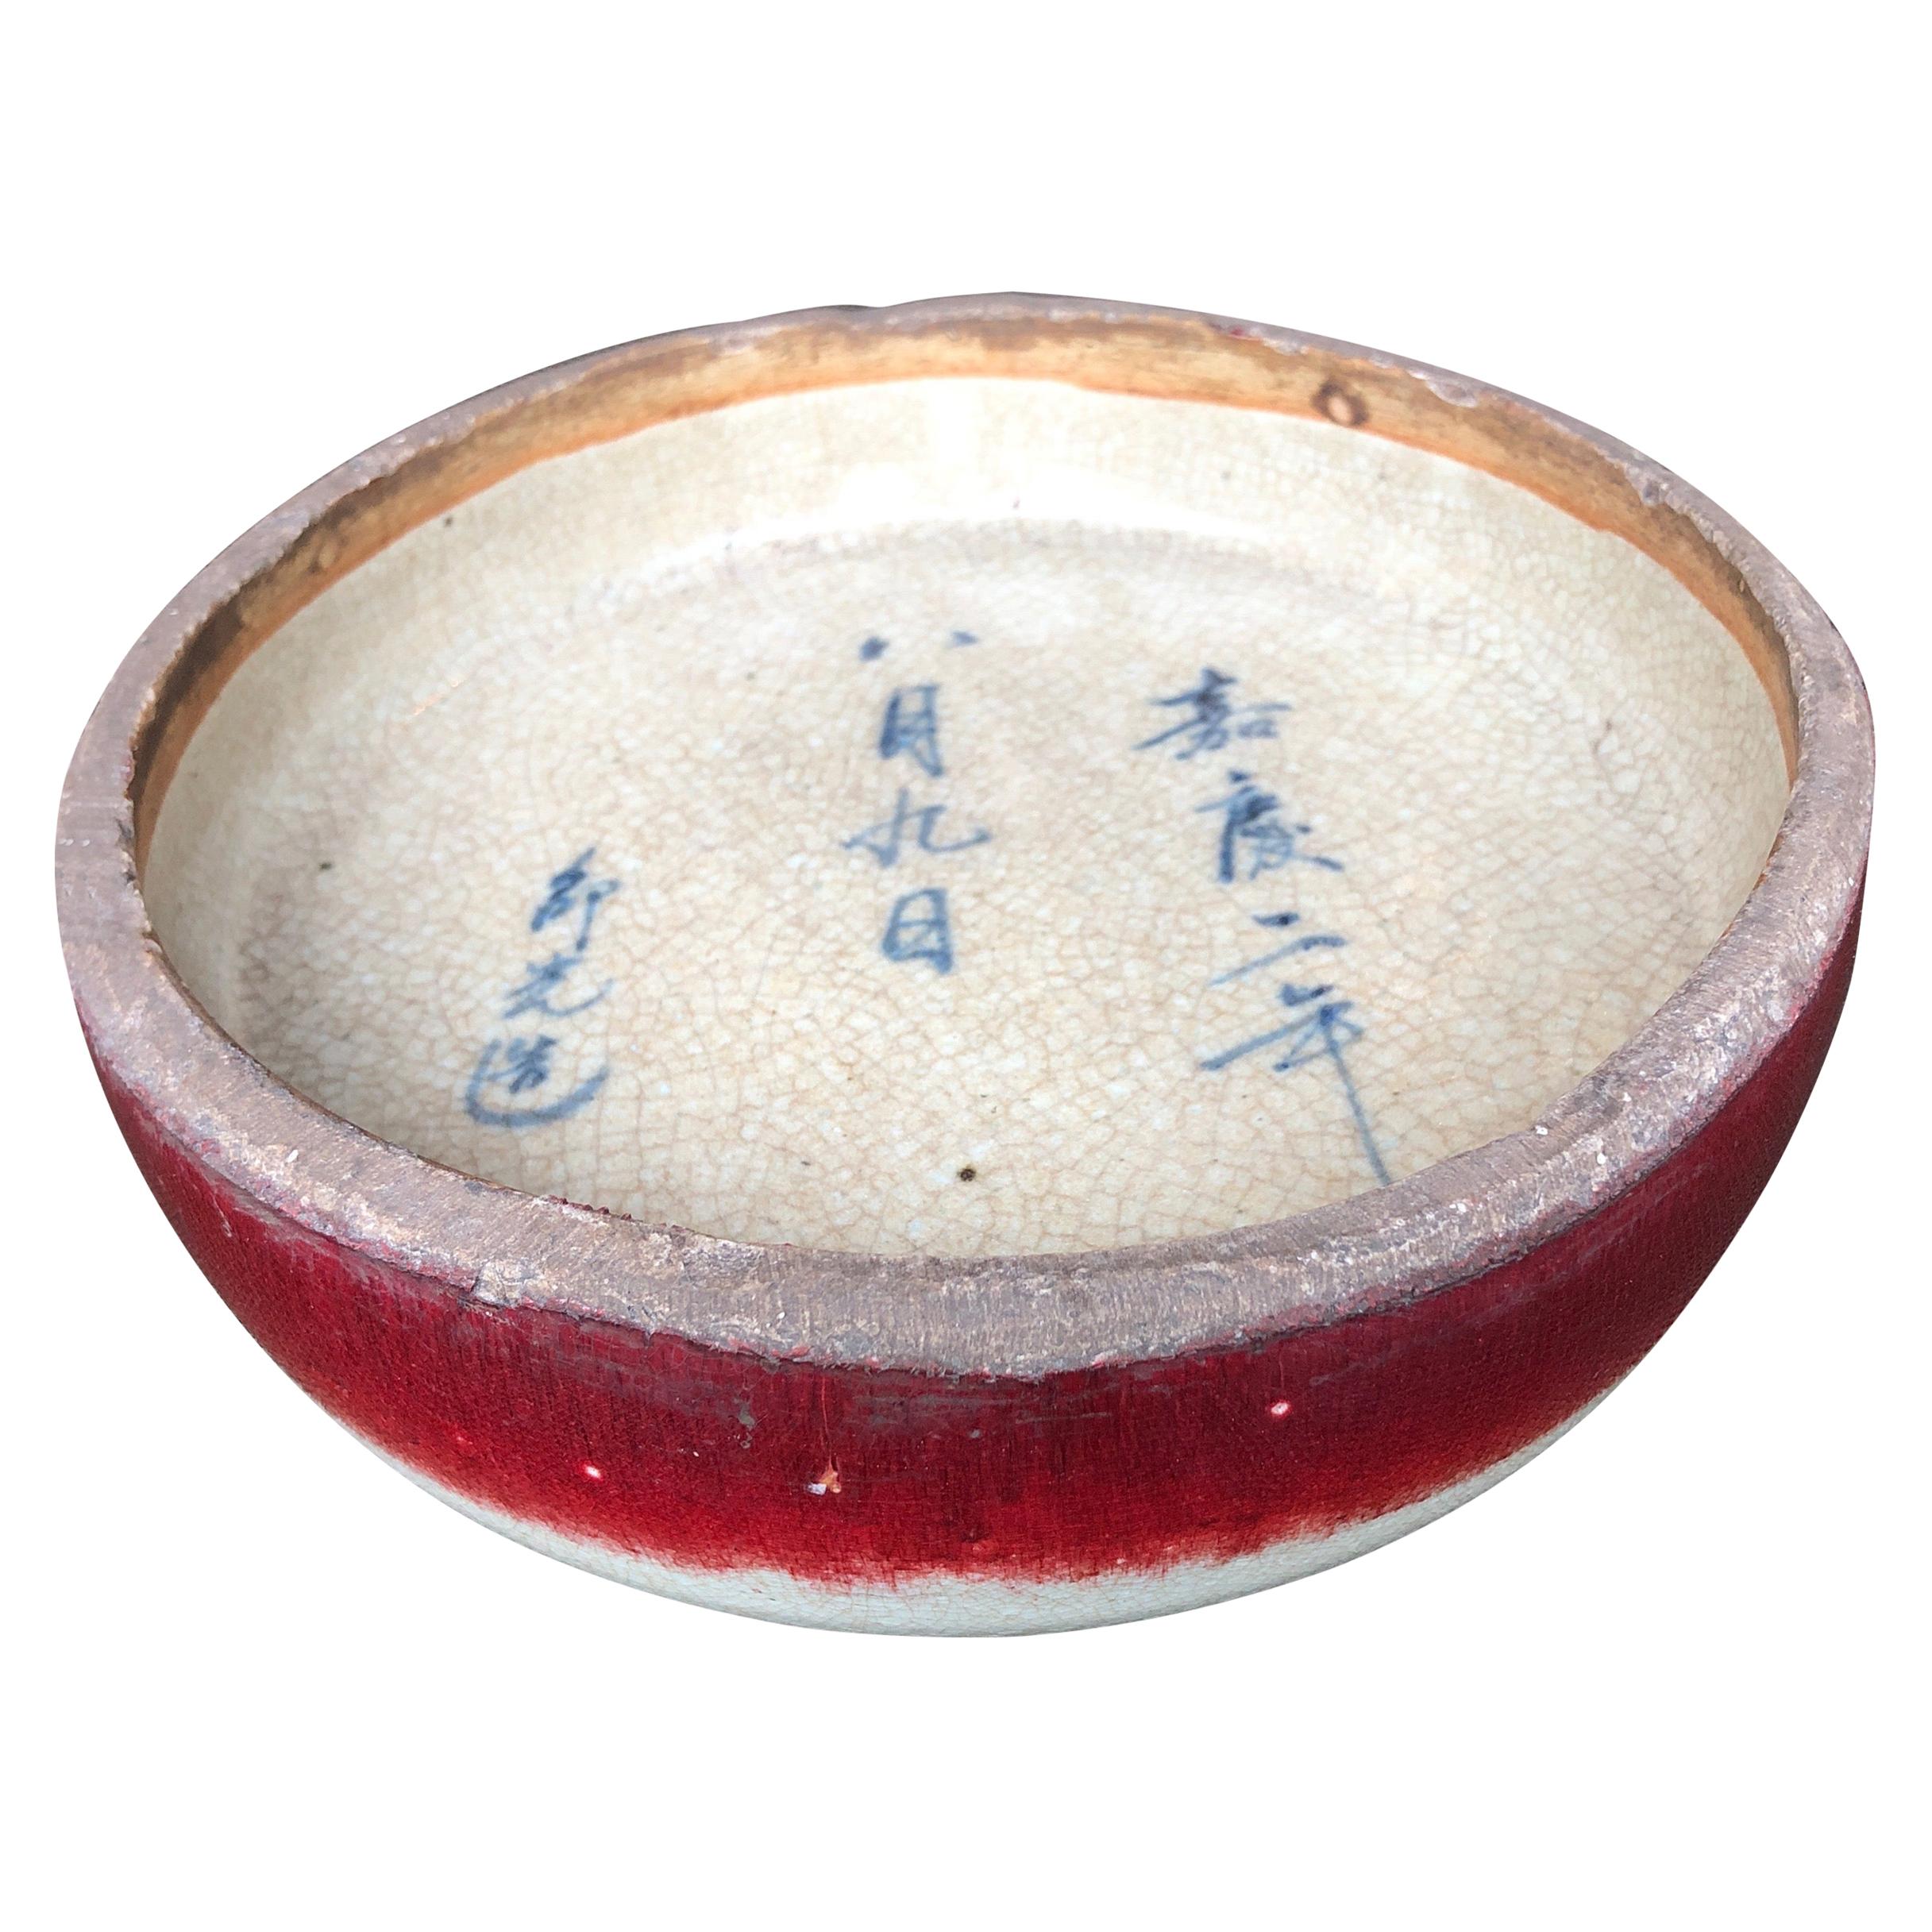 Antique Ceramic Brush Washer with Chinese Calligraphy and Striking Red Accent